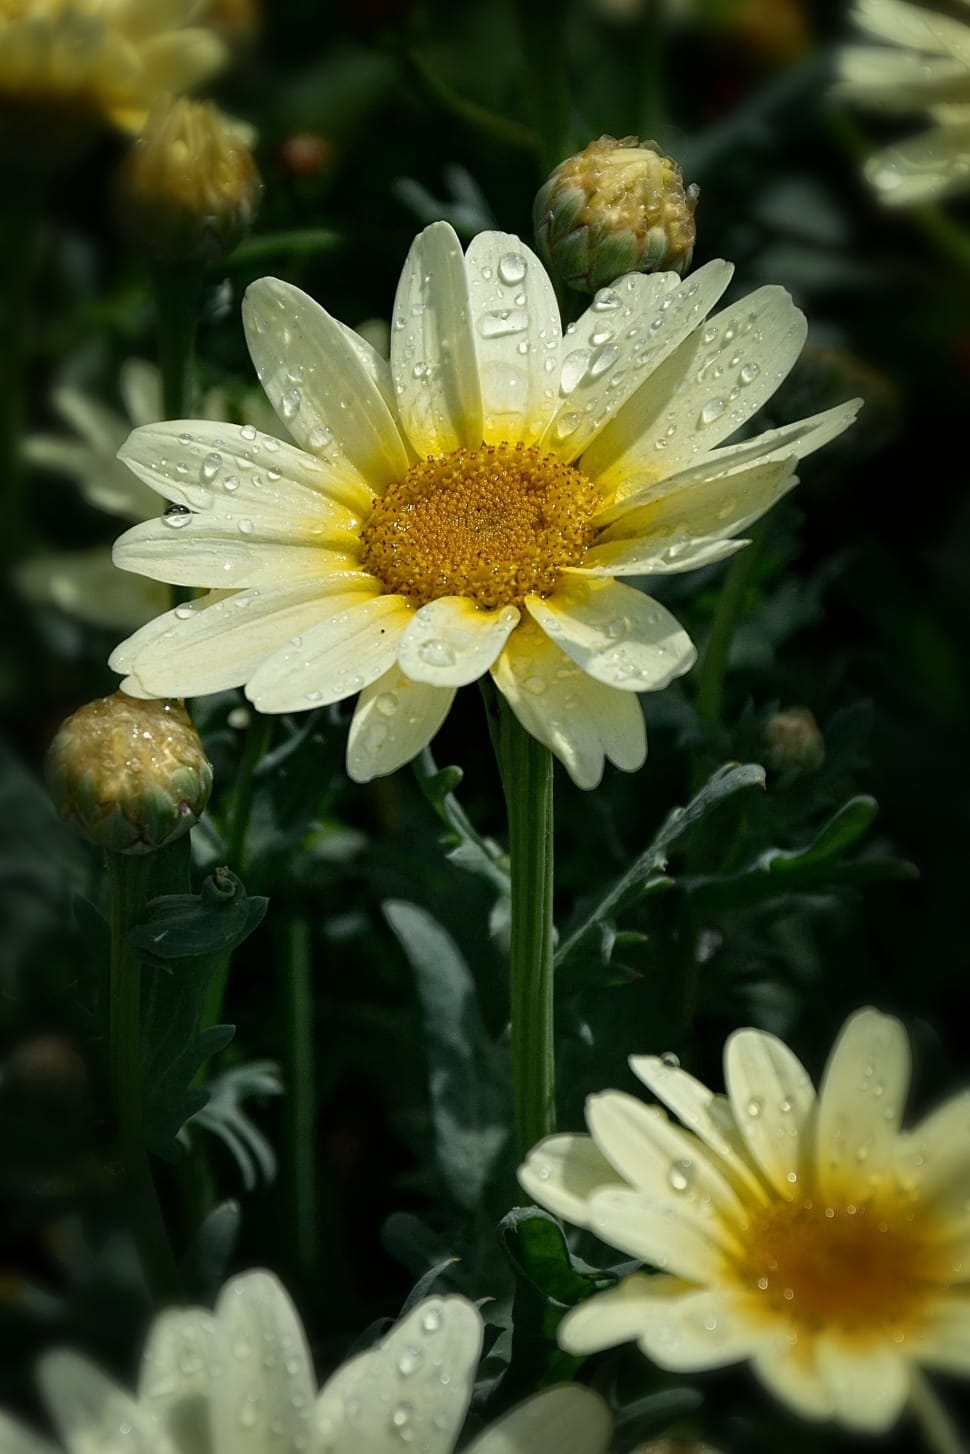 white and yellow flowers preview